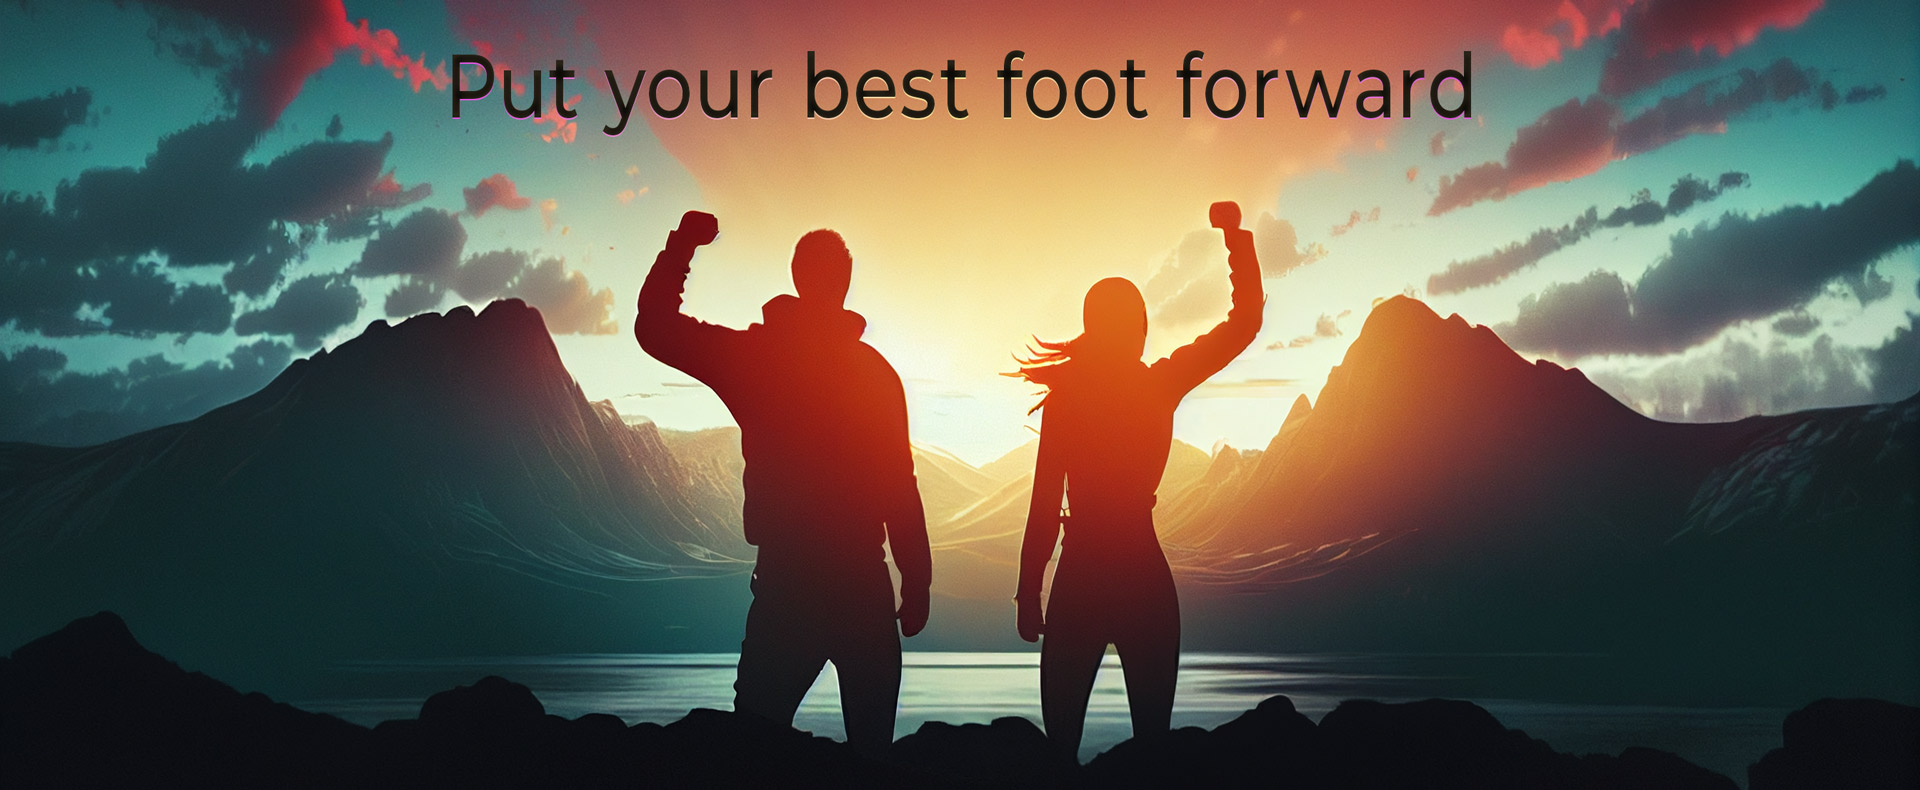 Put your best foot forward